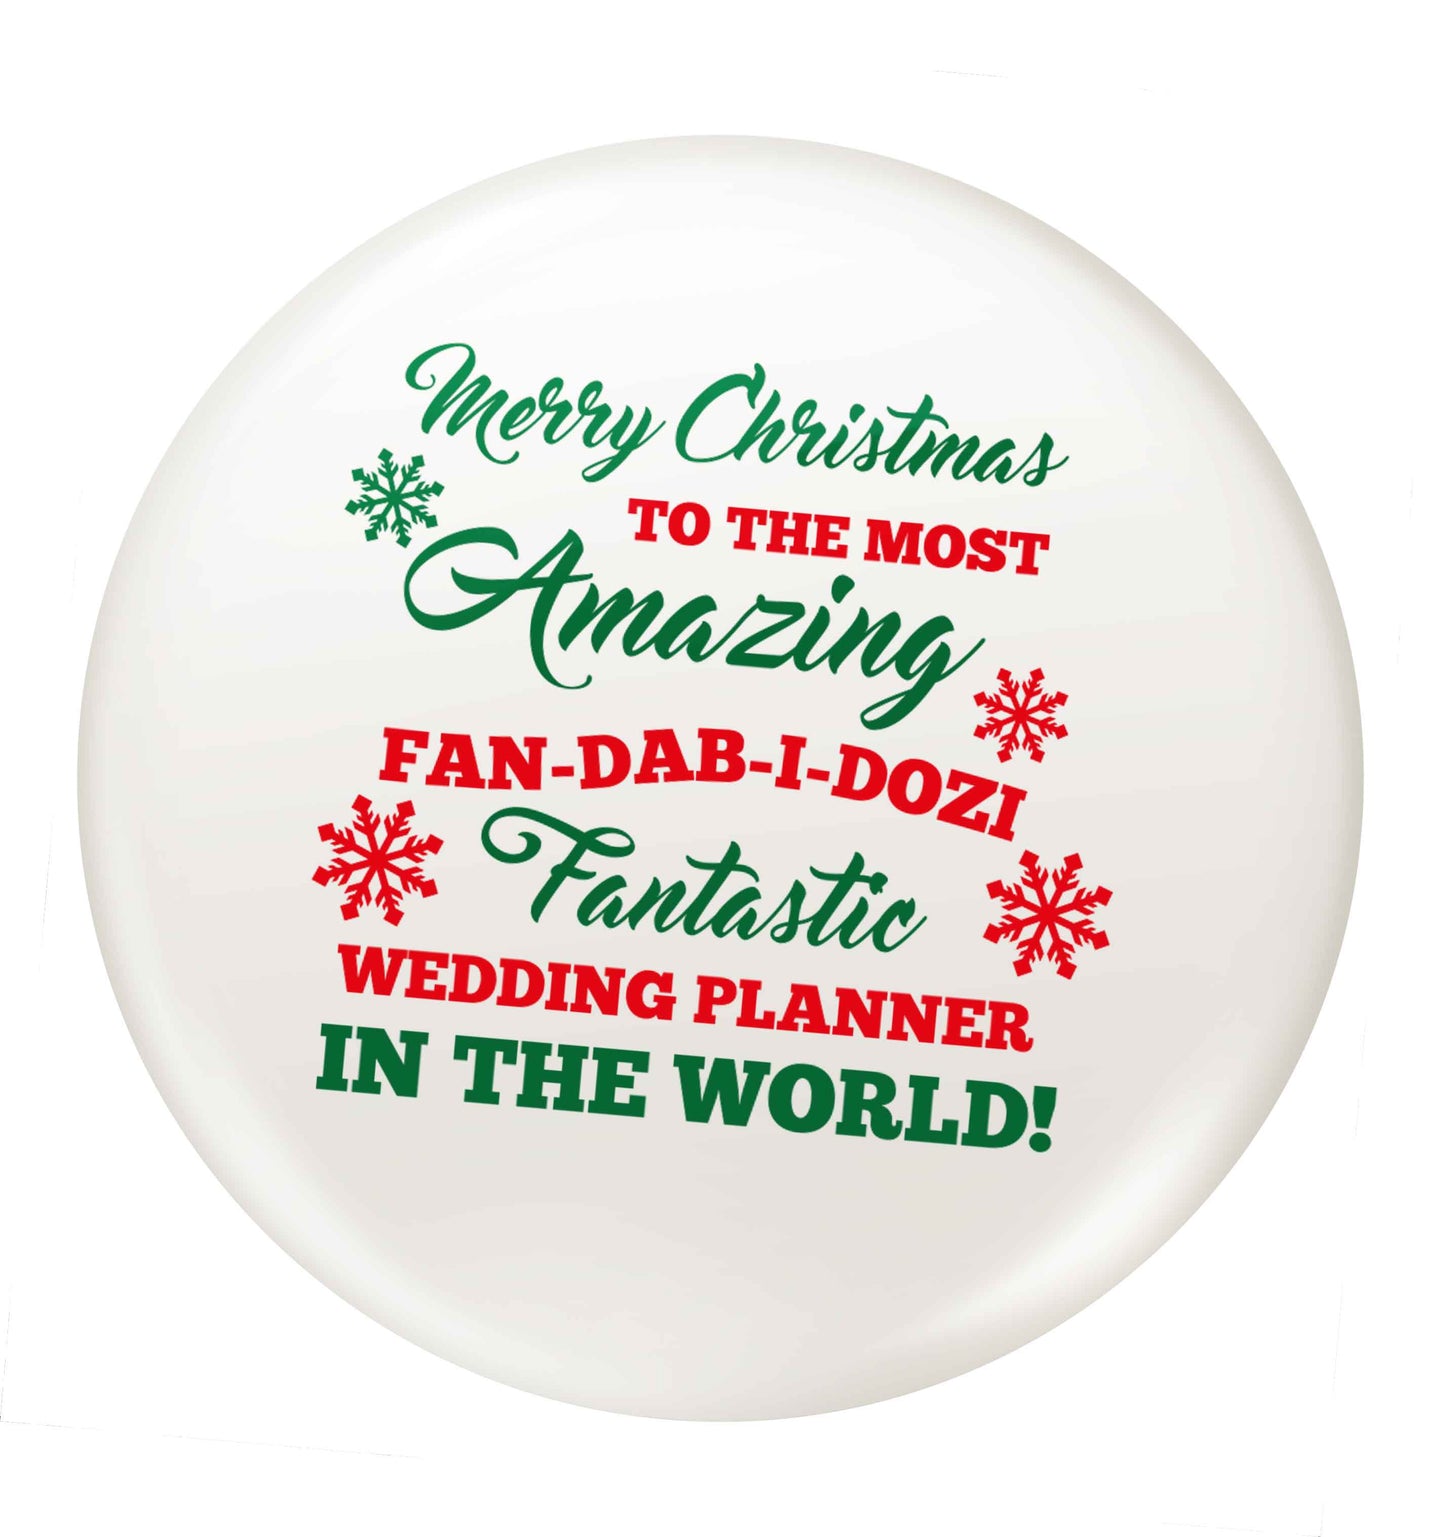 Merry Christmas to the most amazing fan-dab-i-dozi fantasic wedding planner in the world small 25mm Pin badge